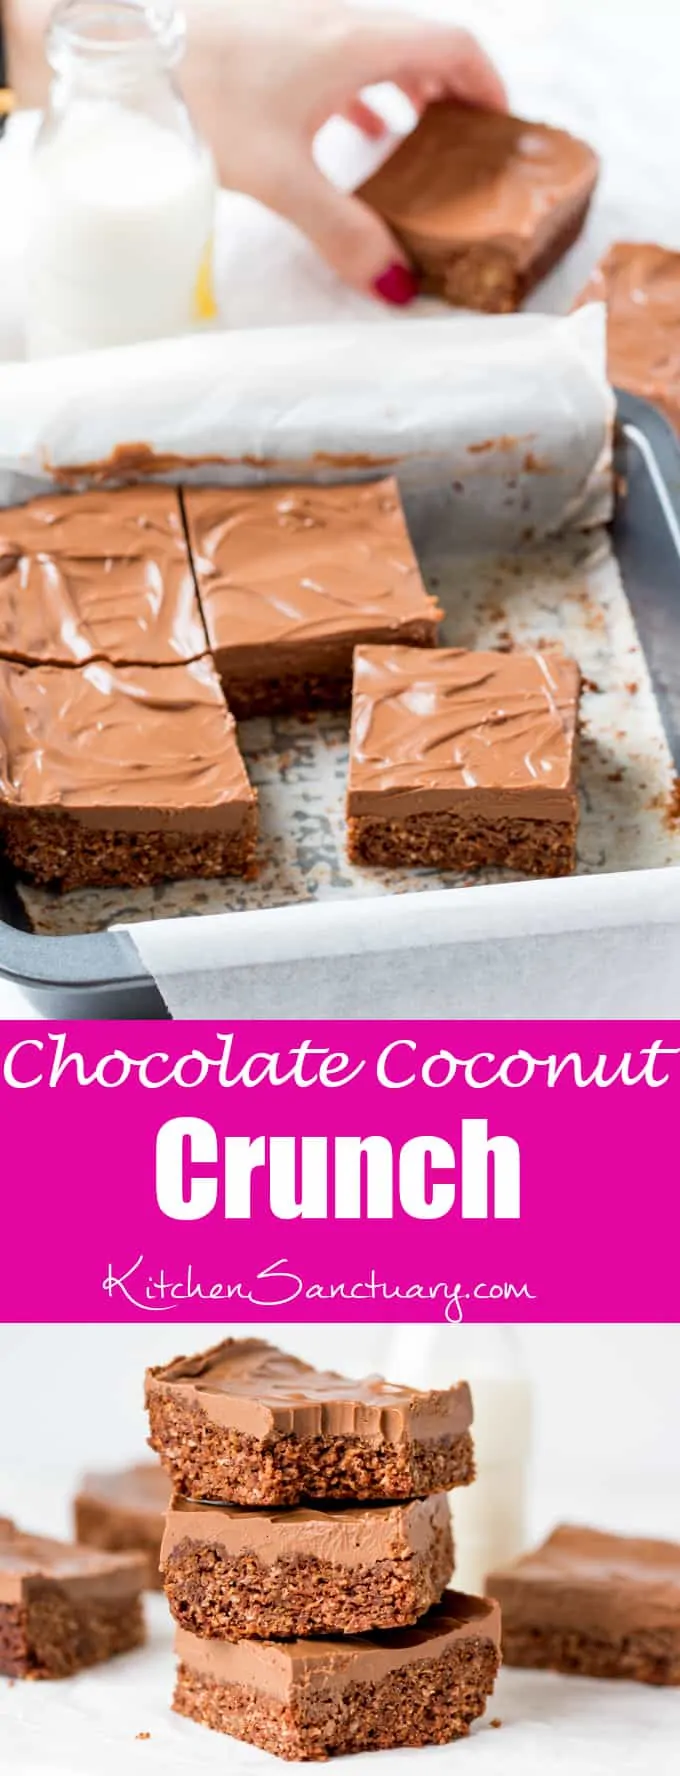 Chocolate Coconut Crunch - my take on the Aussie Crunch we used to get at school. They're crunchy, chewy, very chocolatey and so addictive!